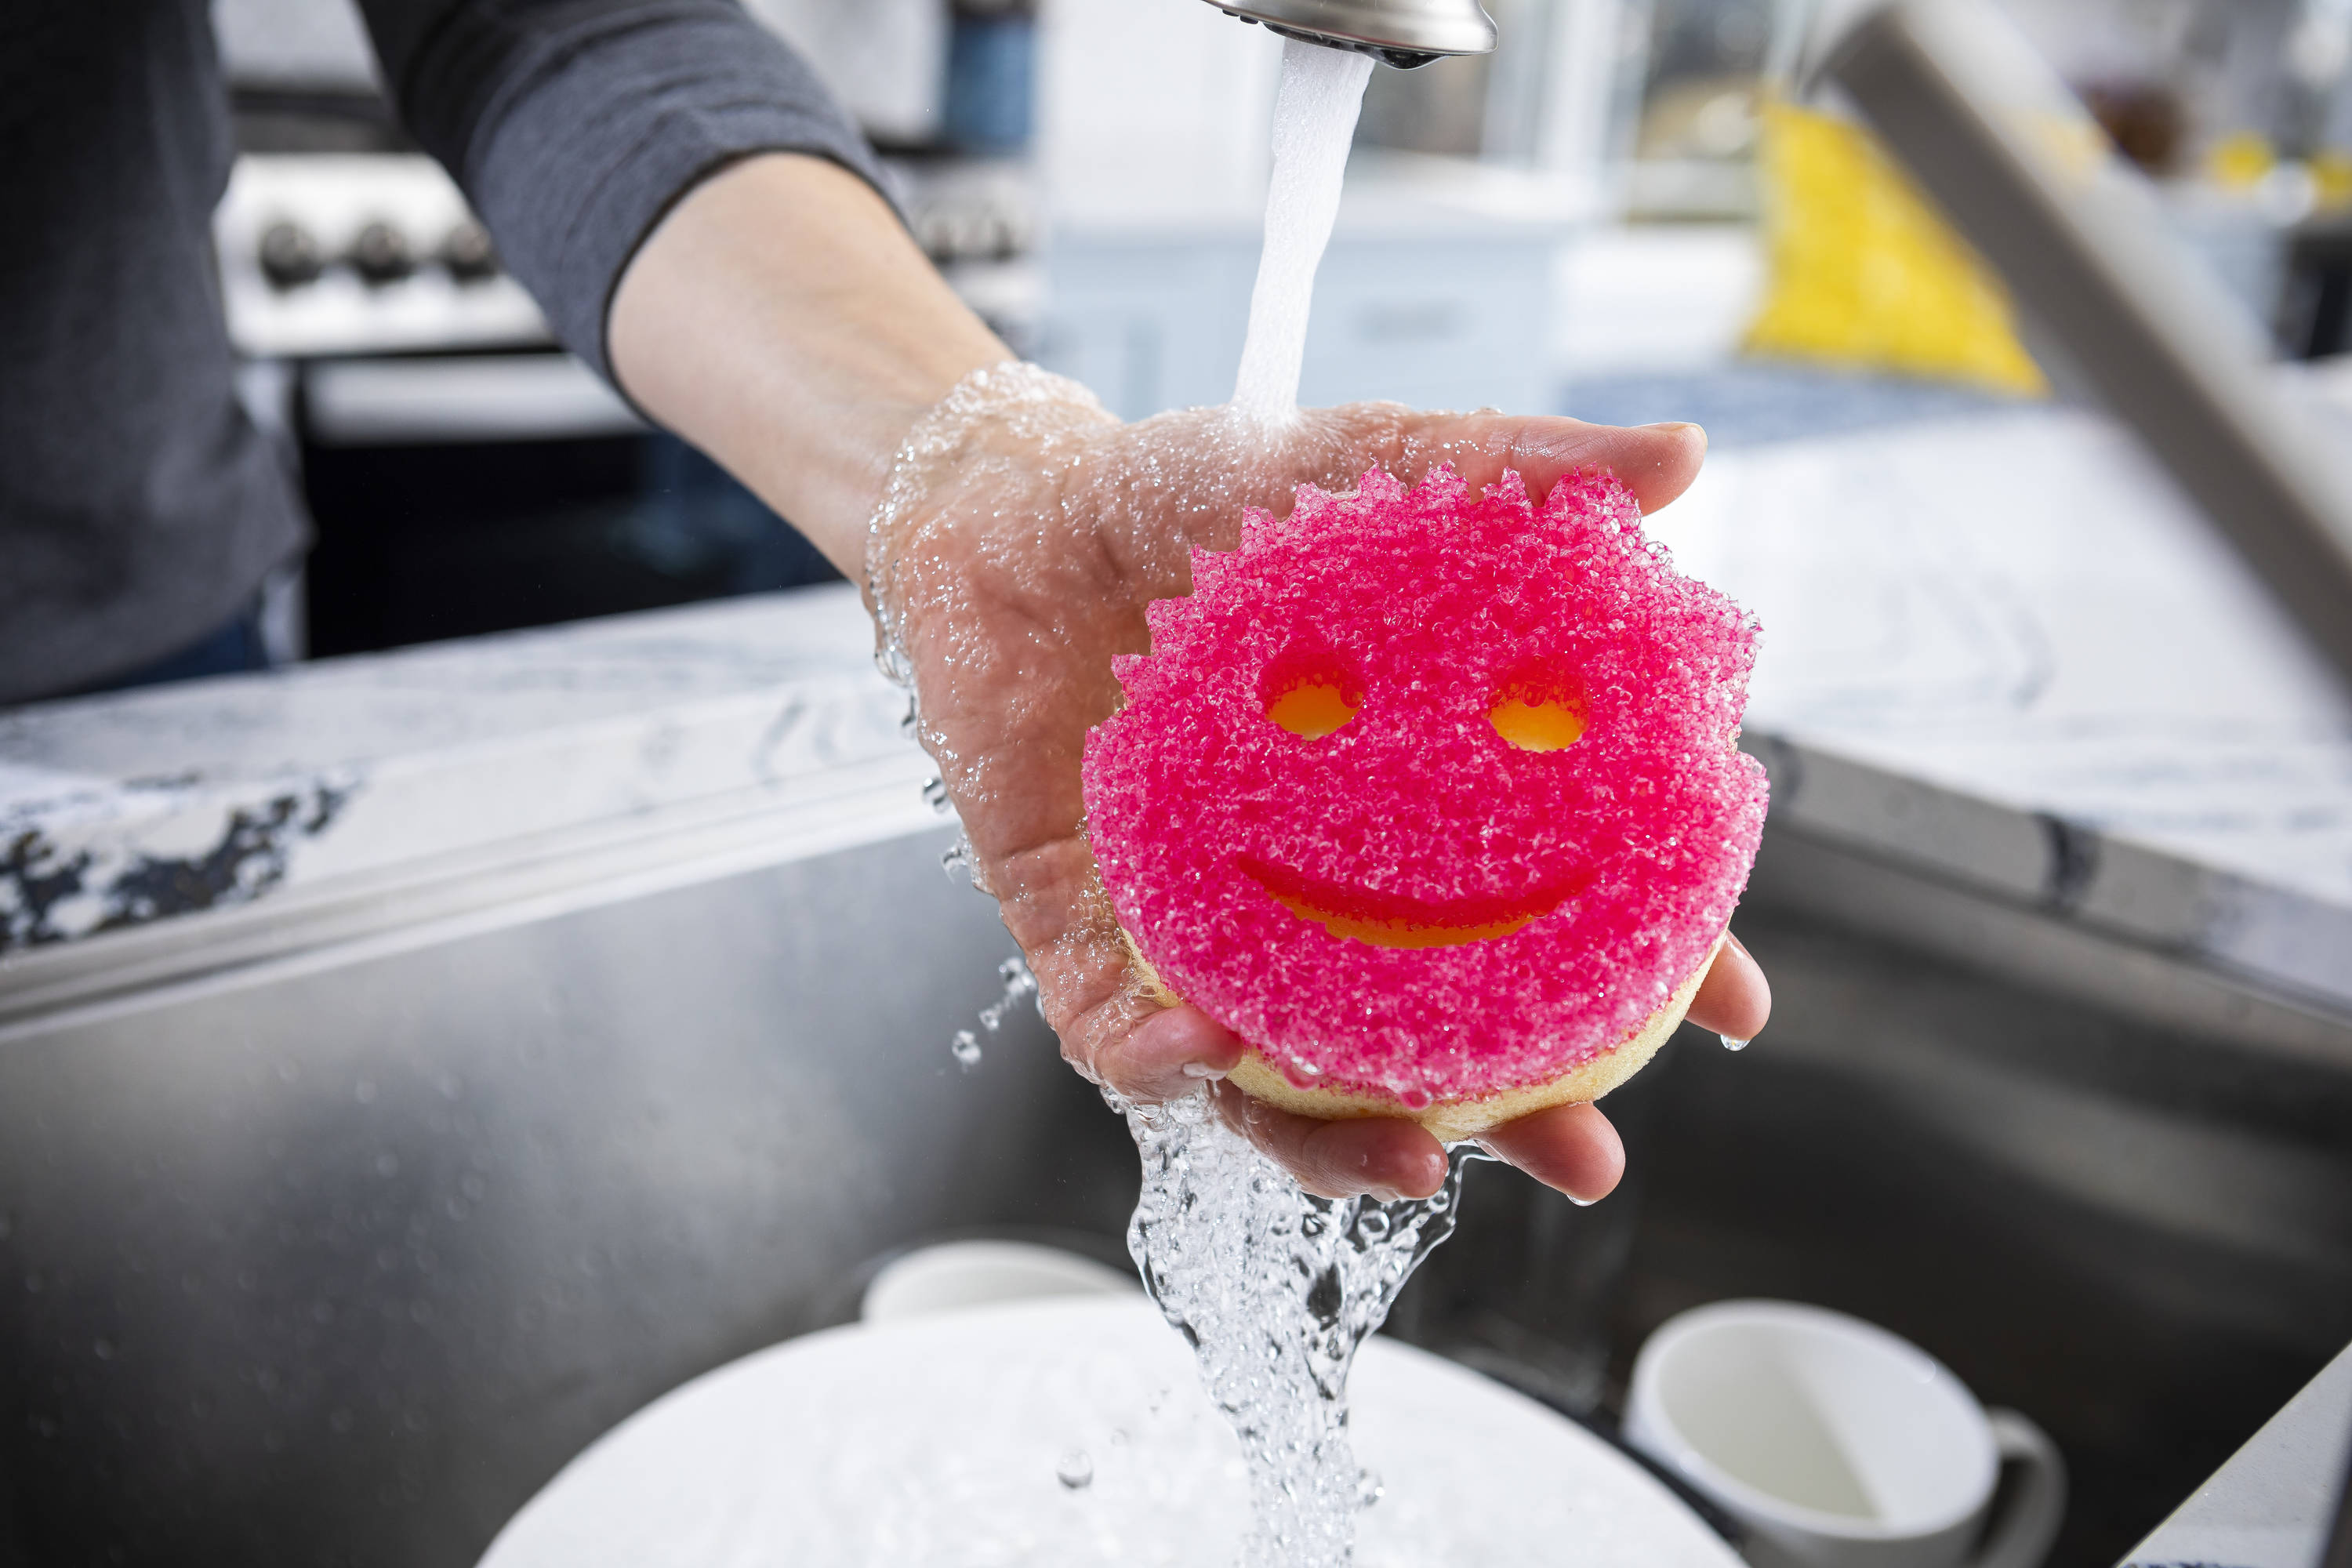 Scrub Daddy Scrub Mommy 1ct Polymer Foam Sponge in the Sponges & Scouring  Pads department at